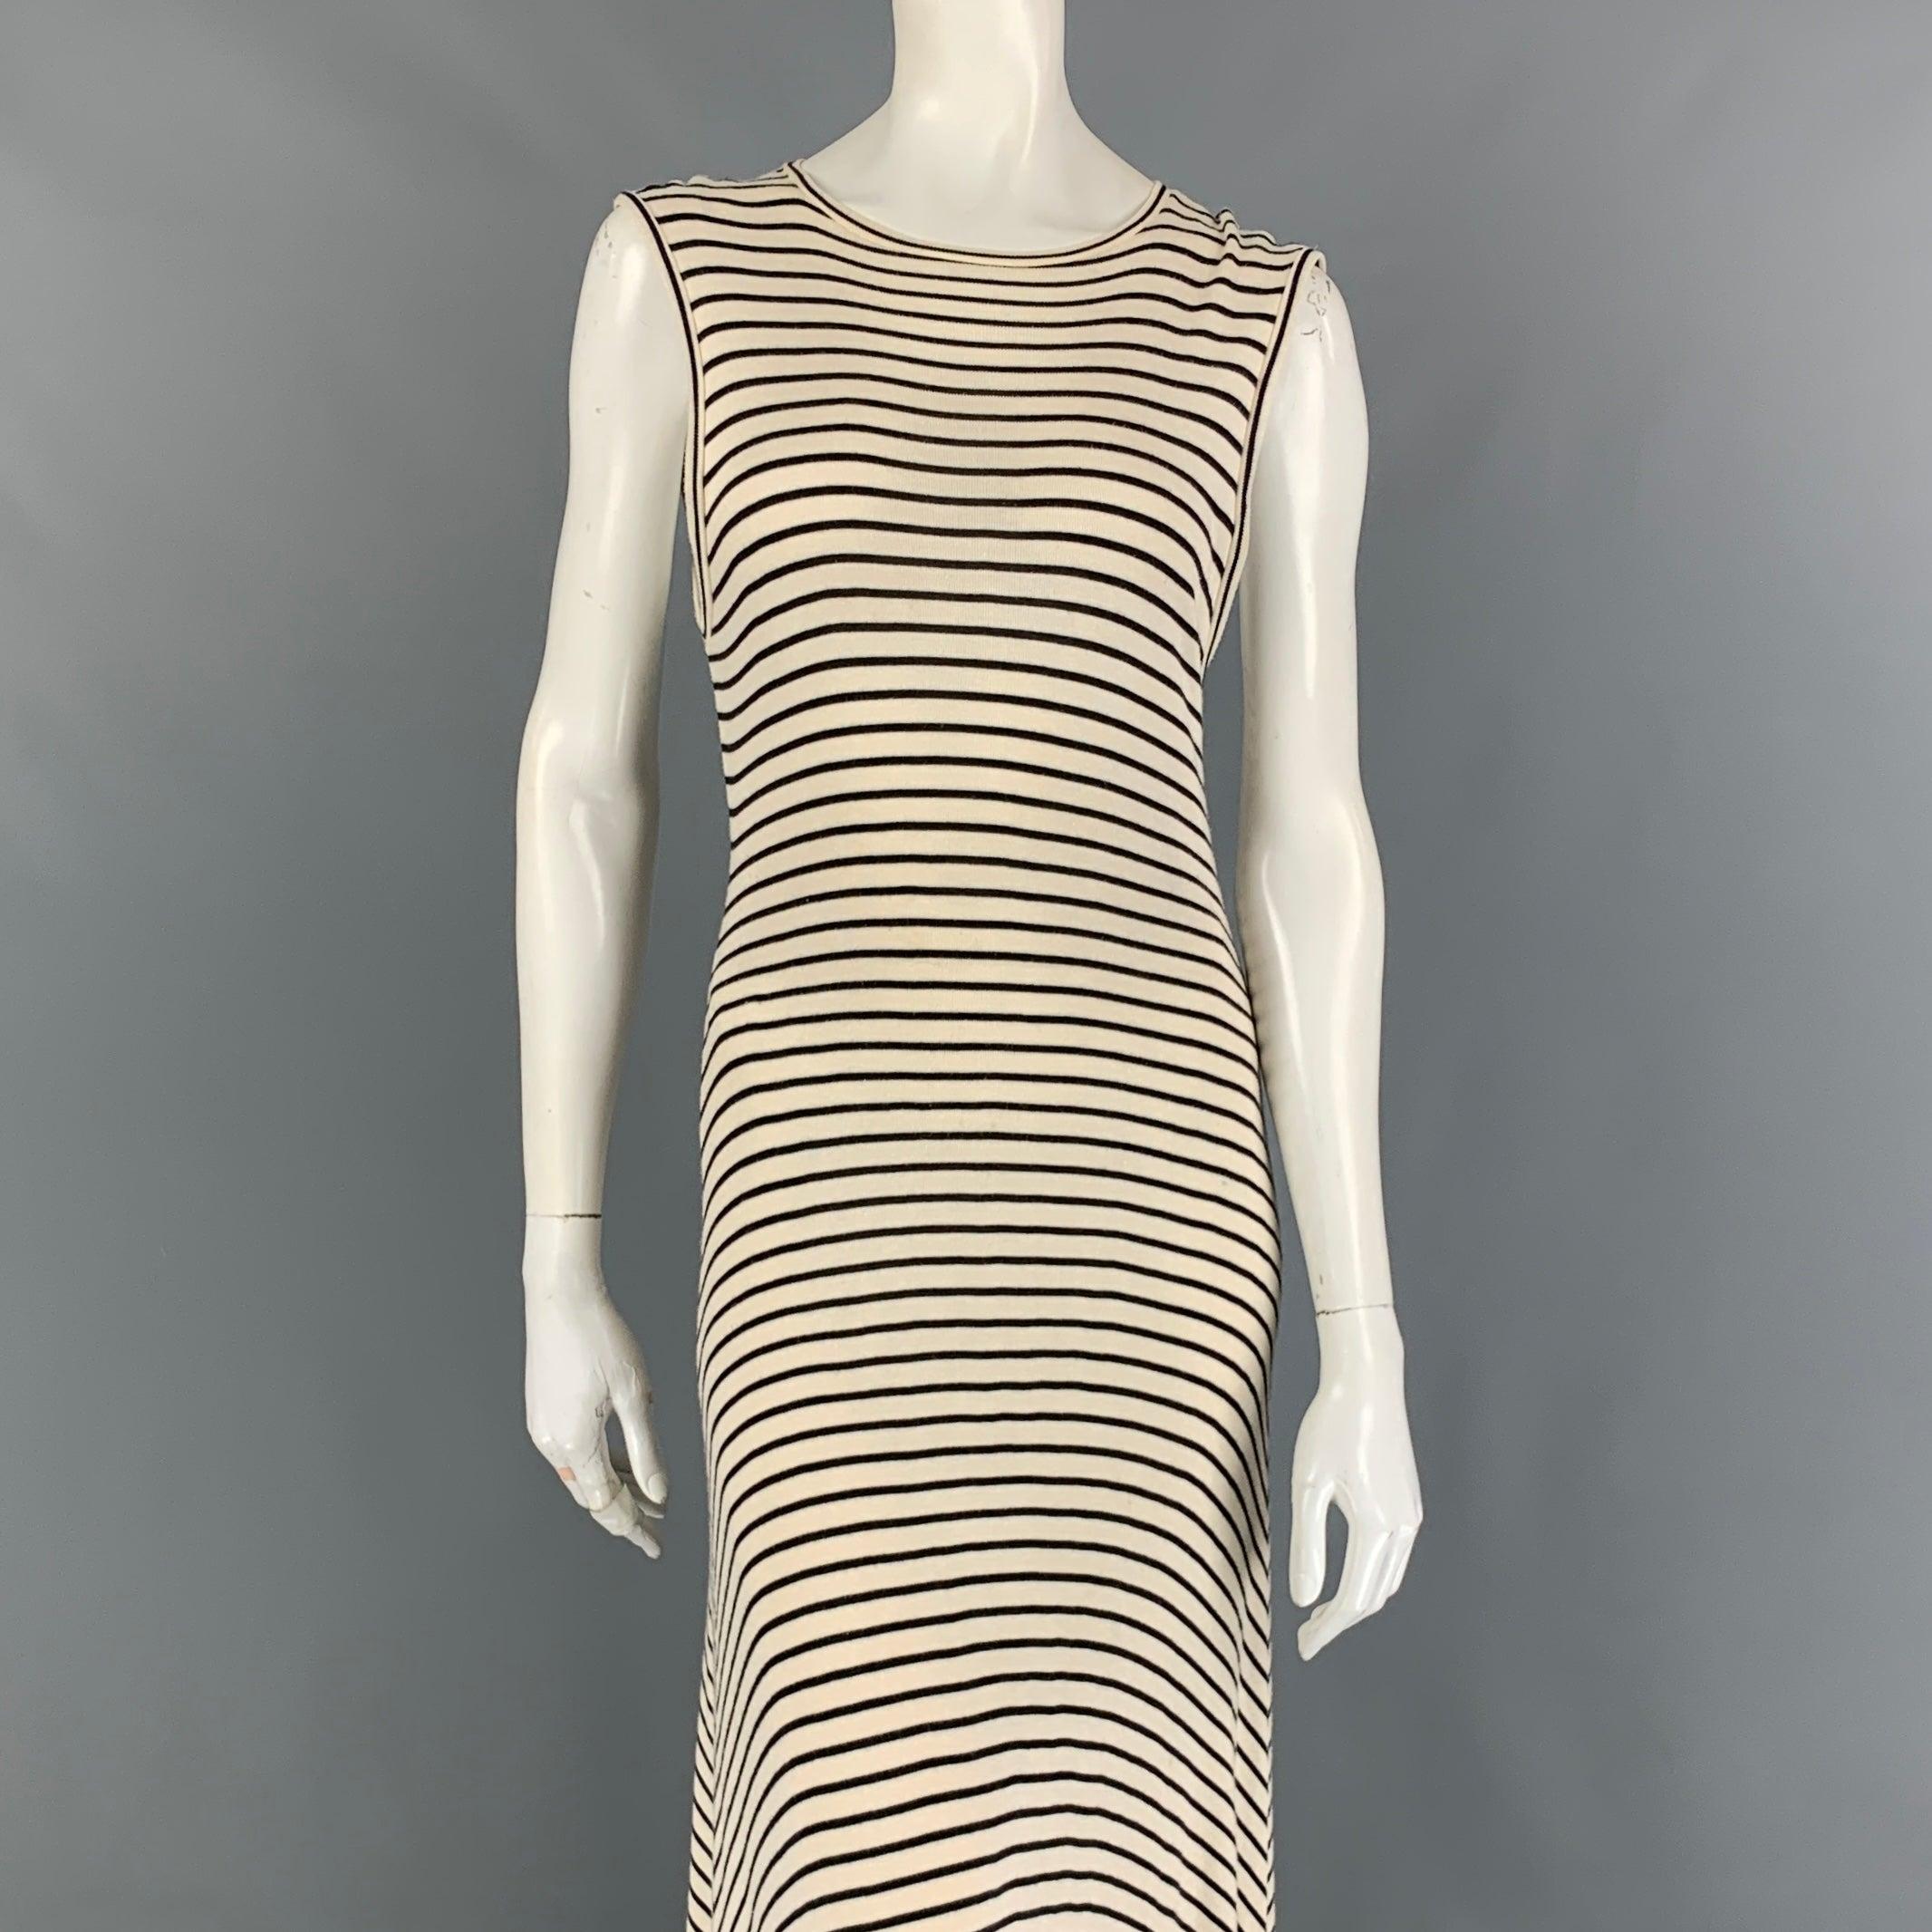 RALPH LAUREN 'Blue Label' long dress comes in a cream & black stripe cotton featuring a sleeveless style and a crew-neck.
Very Good
Pre-Owned Condition. 

Marked:   M 

Measurements: 
 
Shoulder: 17 inches  Bust: 30 inches  Waist: 30 inches  Hip:
38